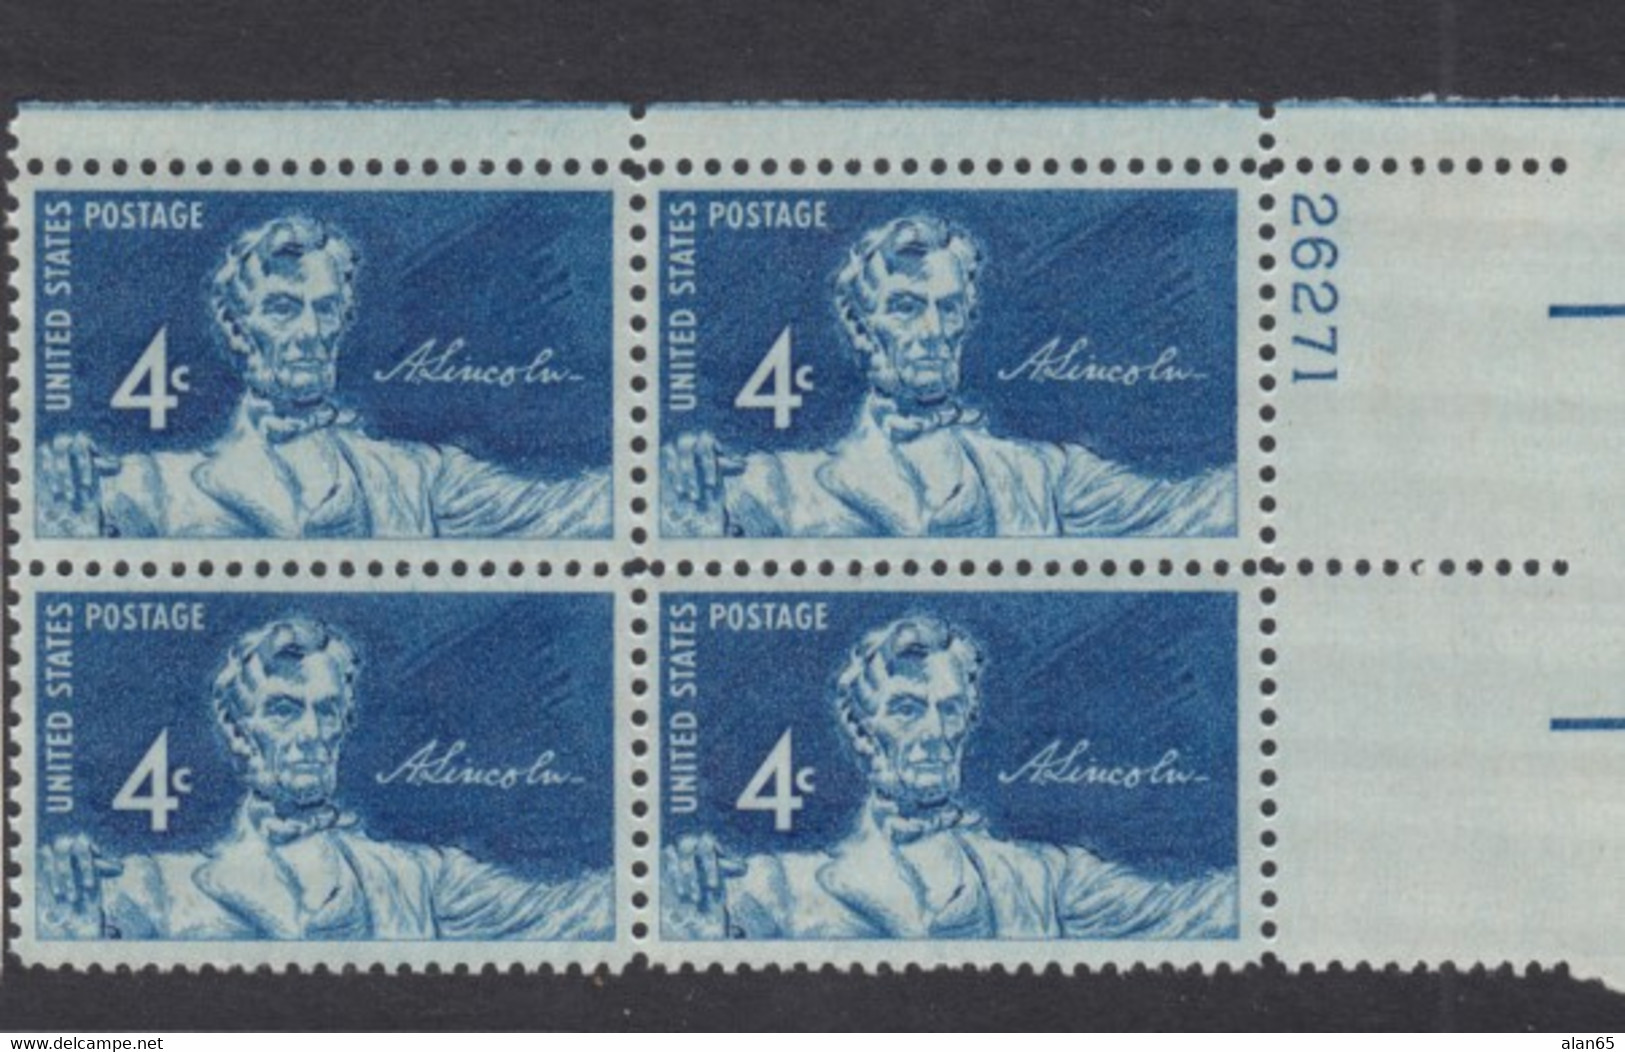 Sc#1116, Plate # Block Of 4 MNH, 4c Lincoln Sesquicentennial Issue, Daniel Chester French Statue US President Lincoln - Plate Blocks & Sheetlets